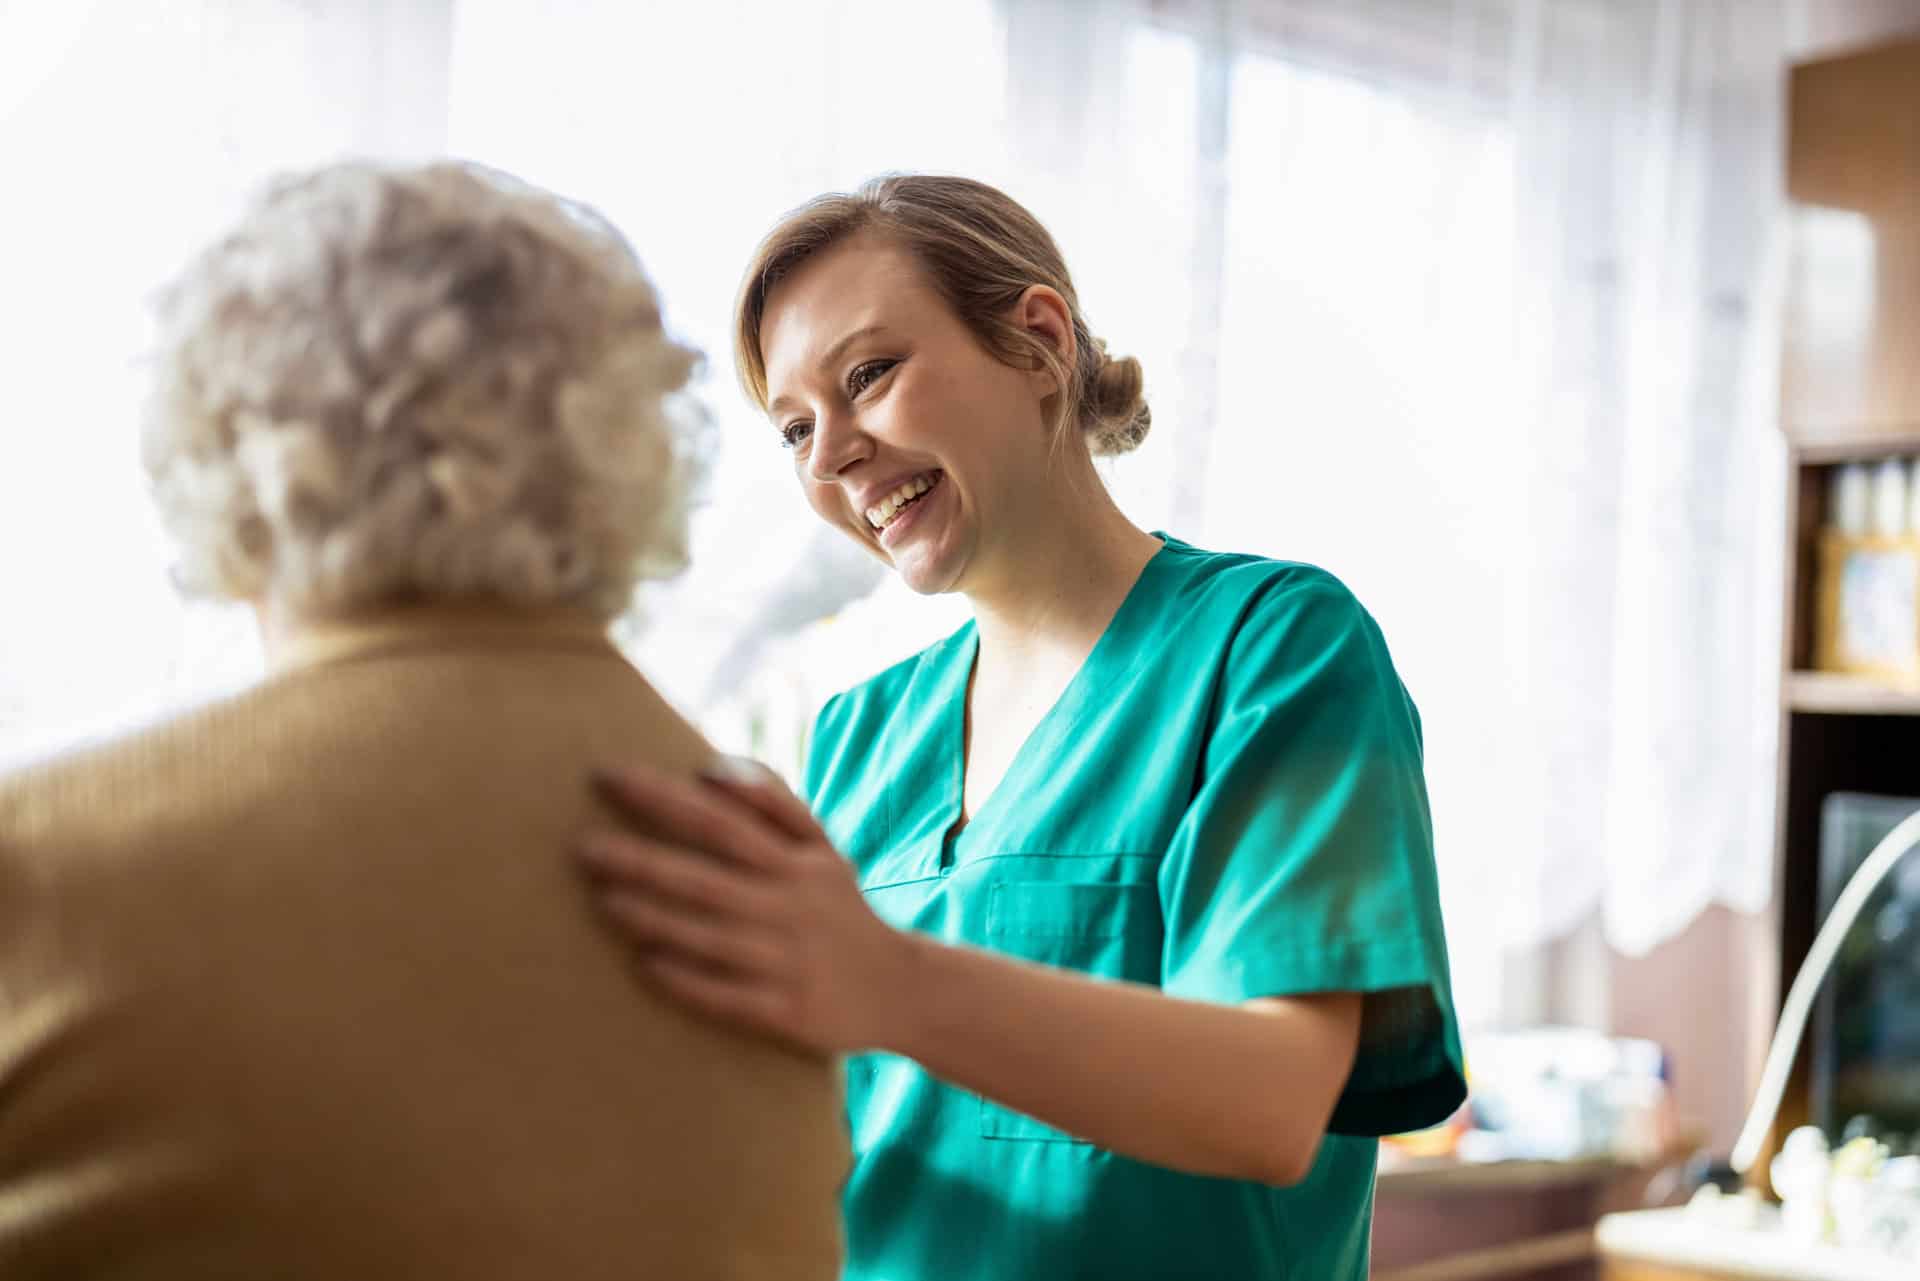 what makes a good care worker? A care worker looking after an elderly woman